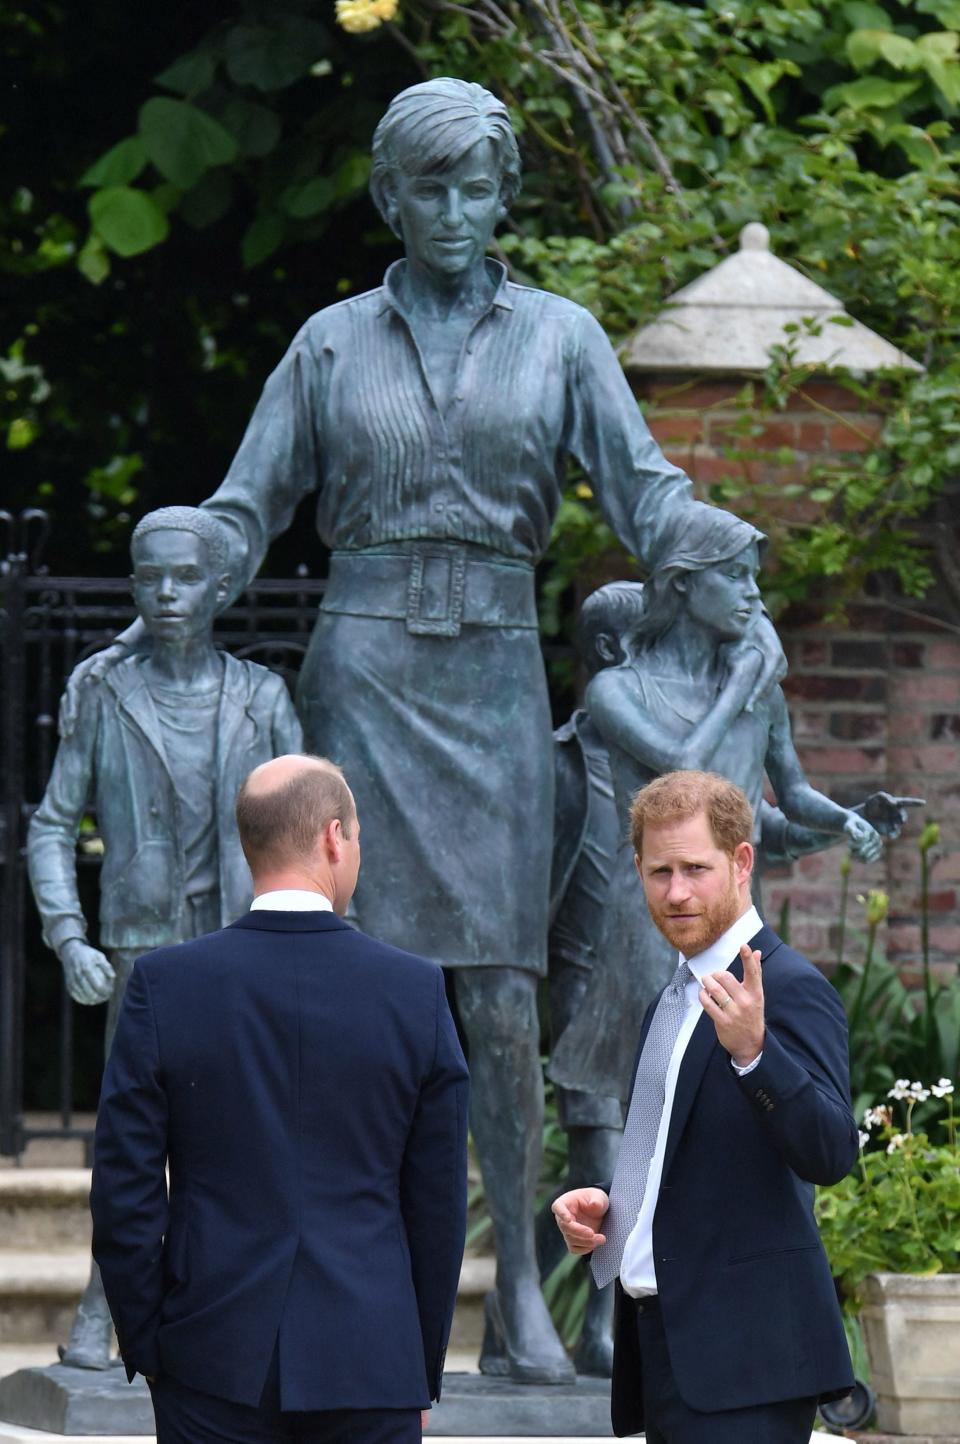 Harry speaking to William in front of a blue statue of Princess Diana.